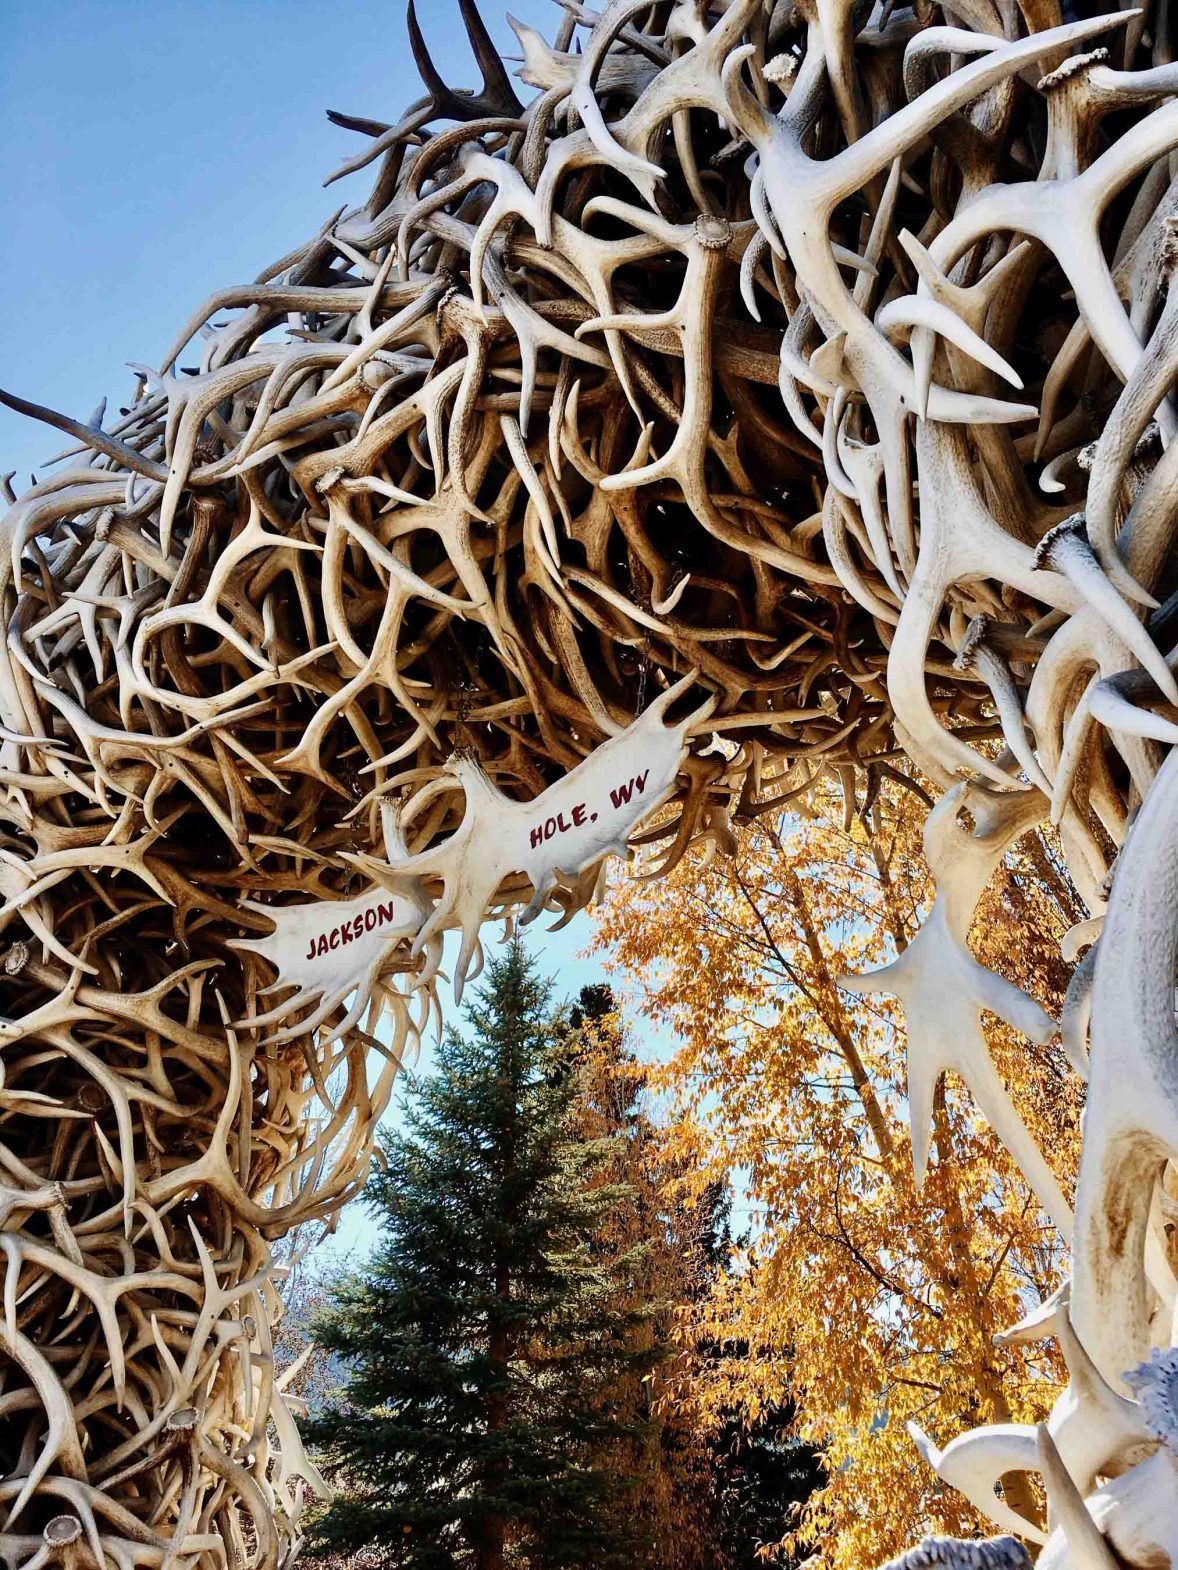 The antlers that make up the archway at the entry to Jackson Hole.